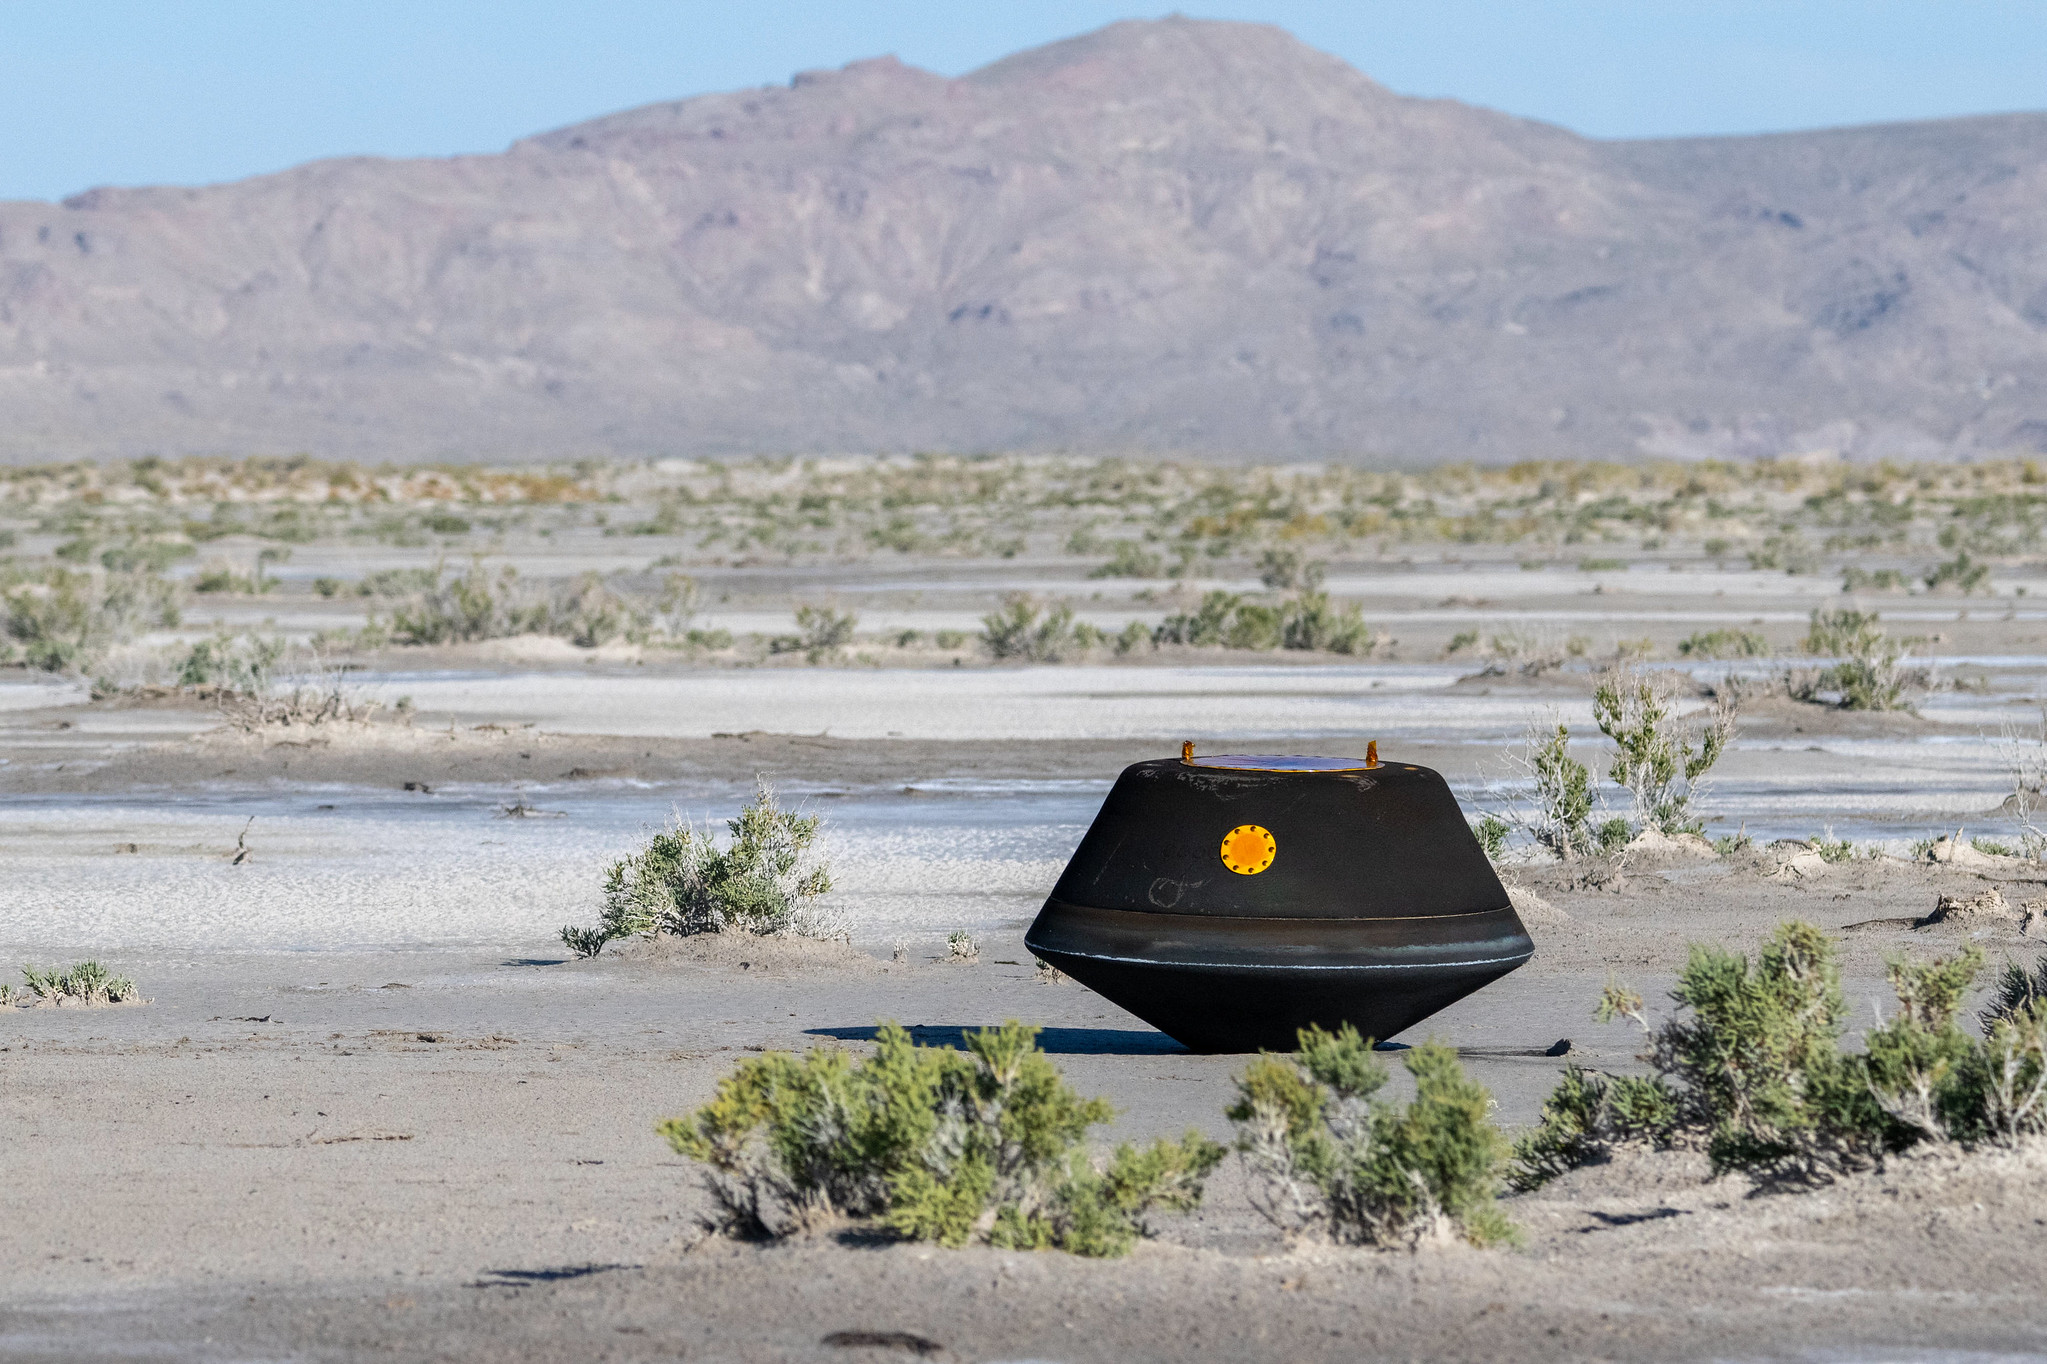 A photo of a black UFO looking thing in the desert